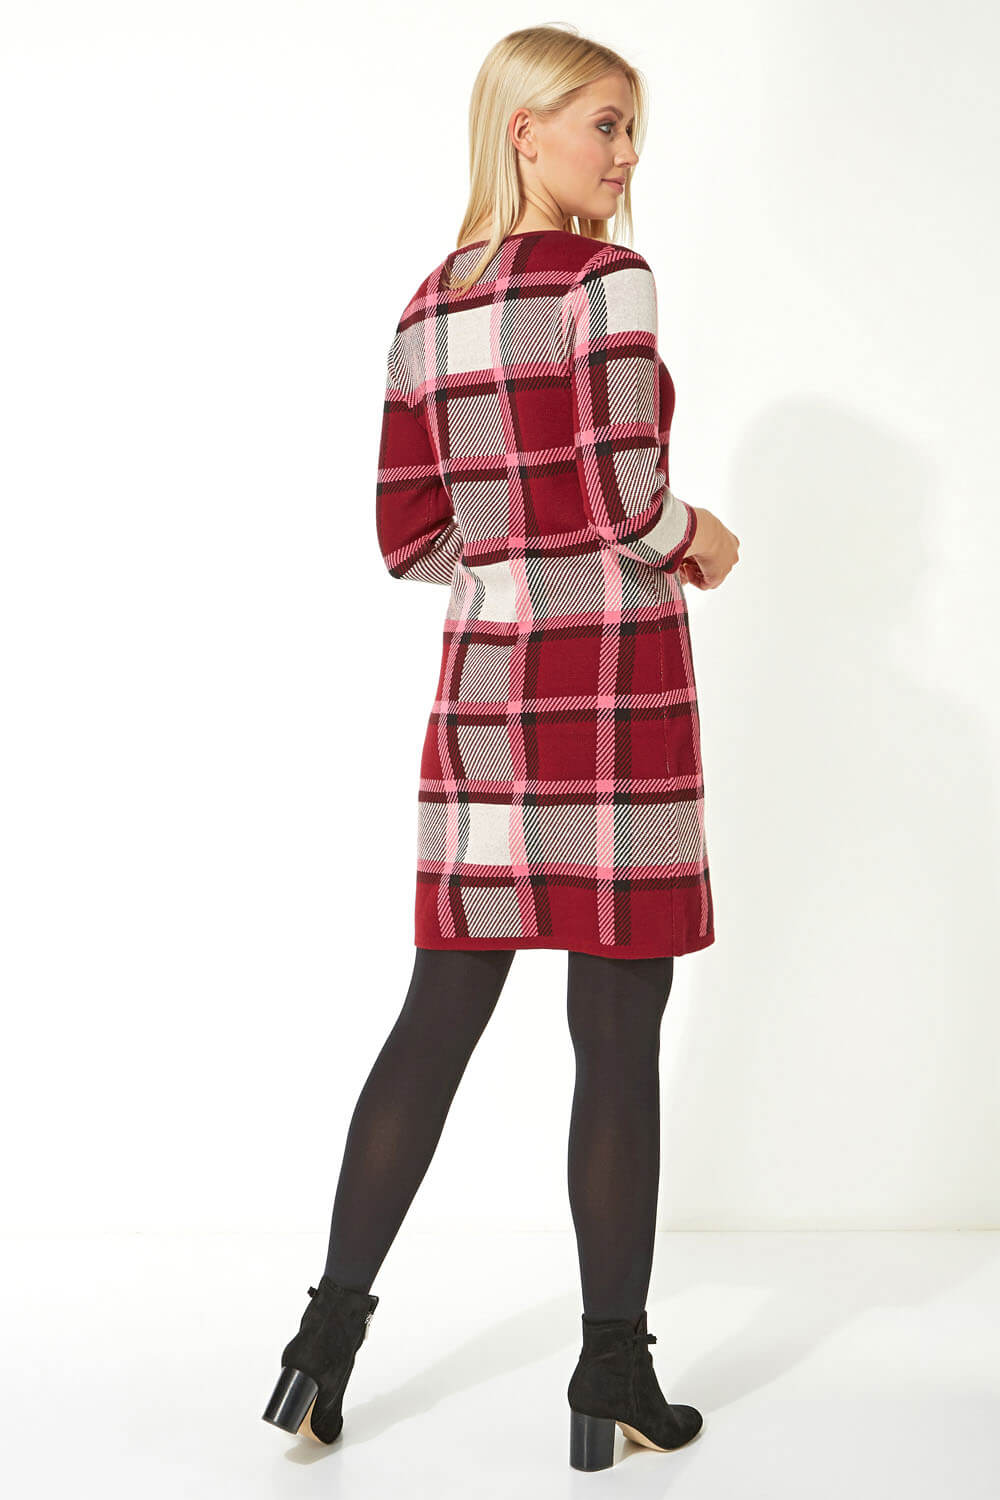 PINK Check Print Knitted Dress, Image 3 of 5